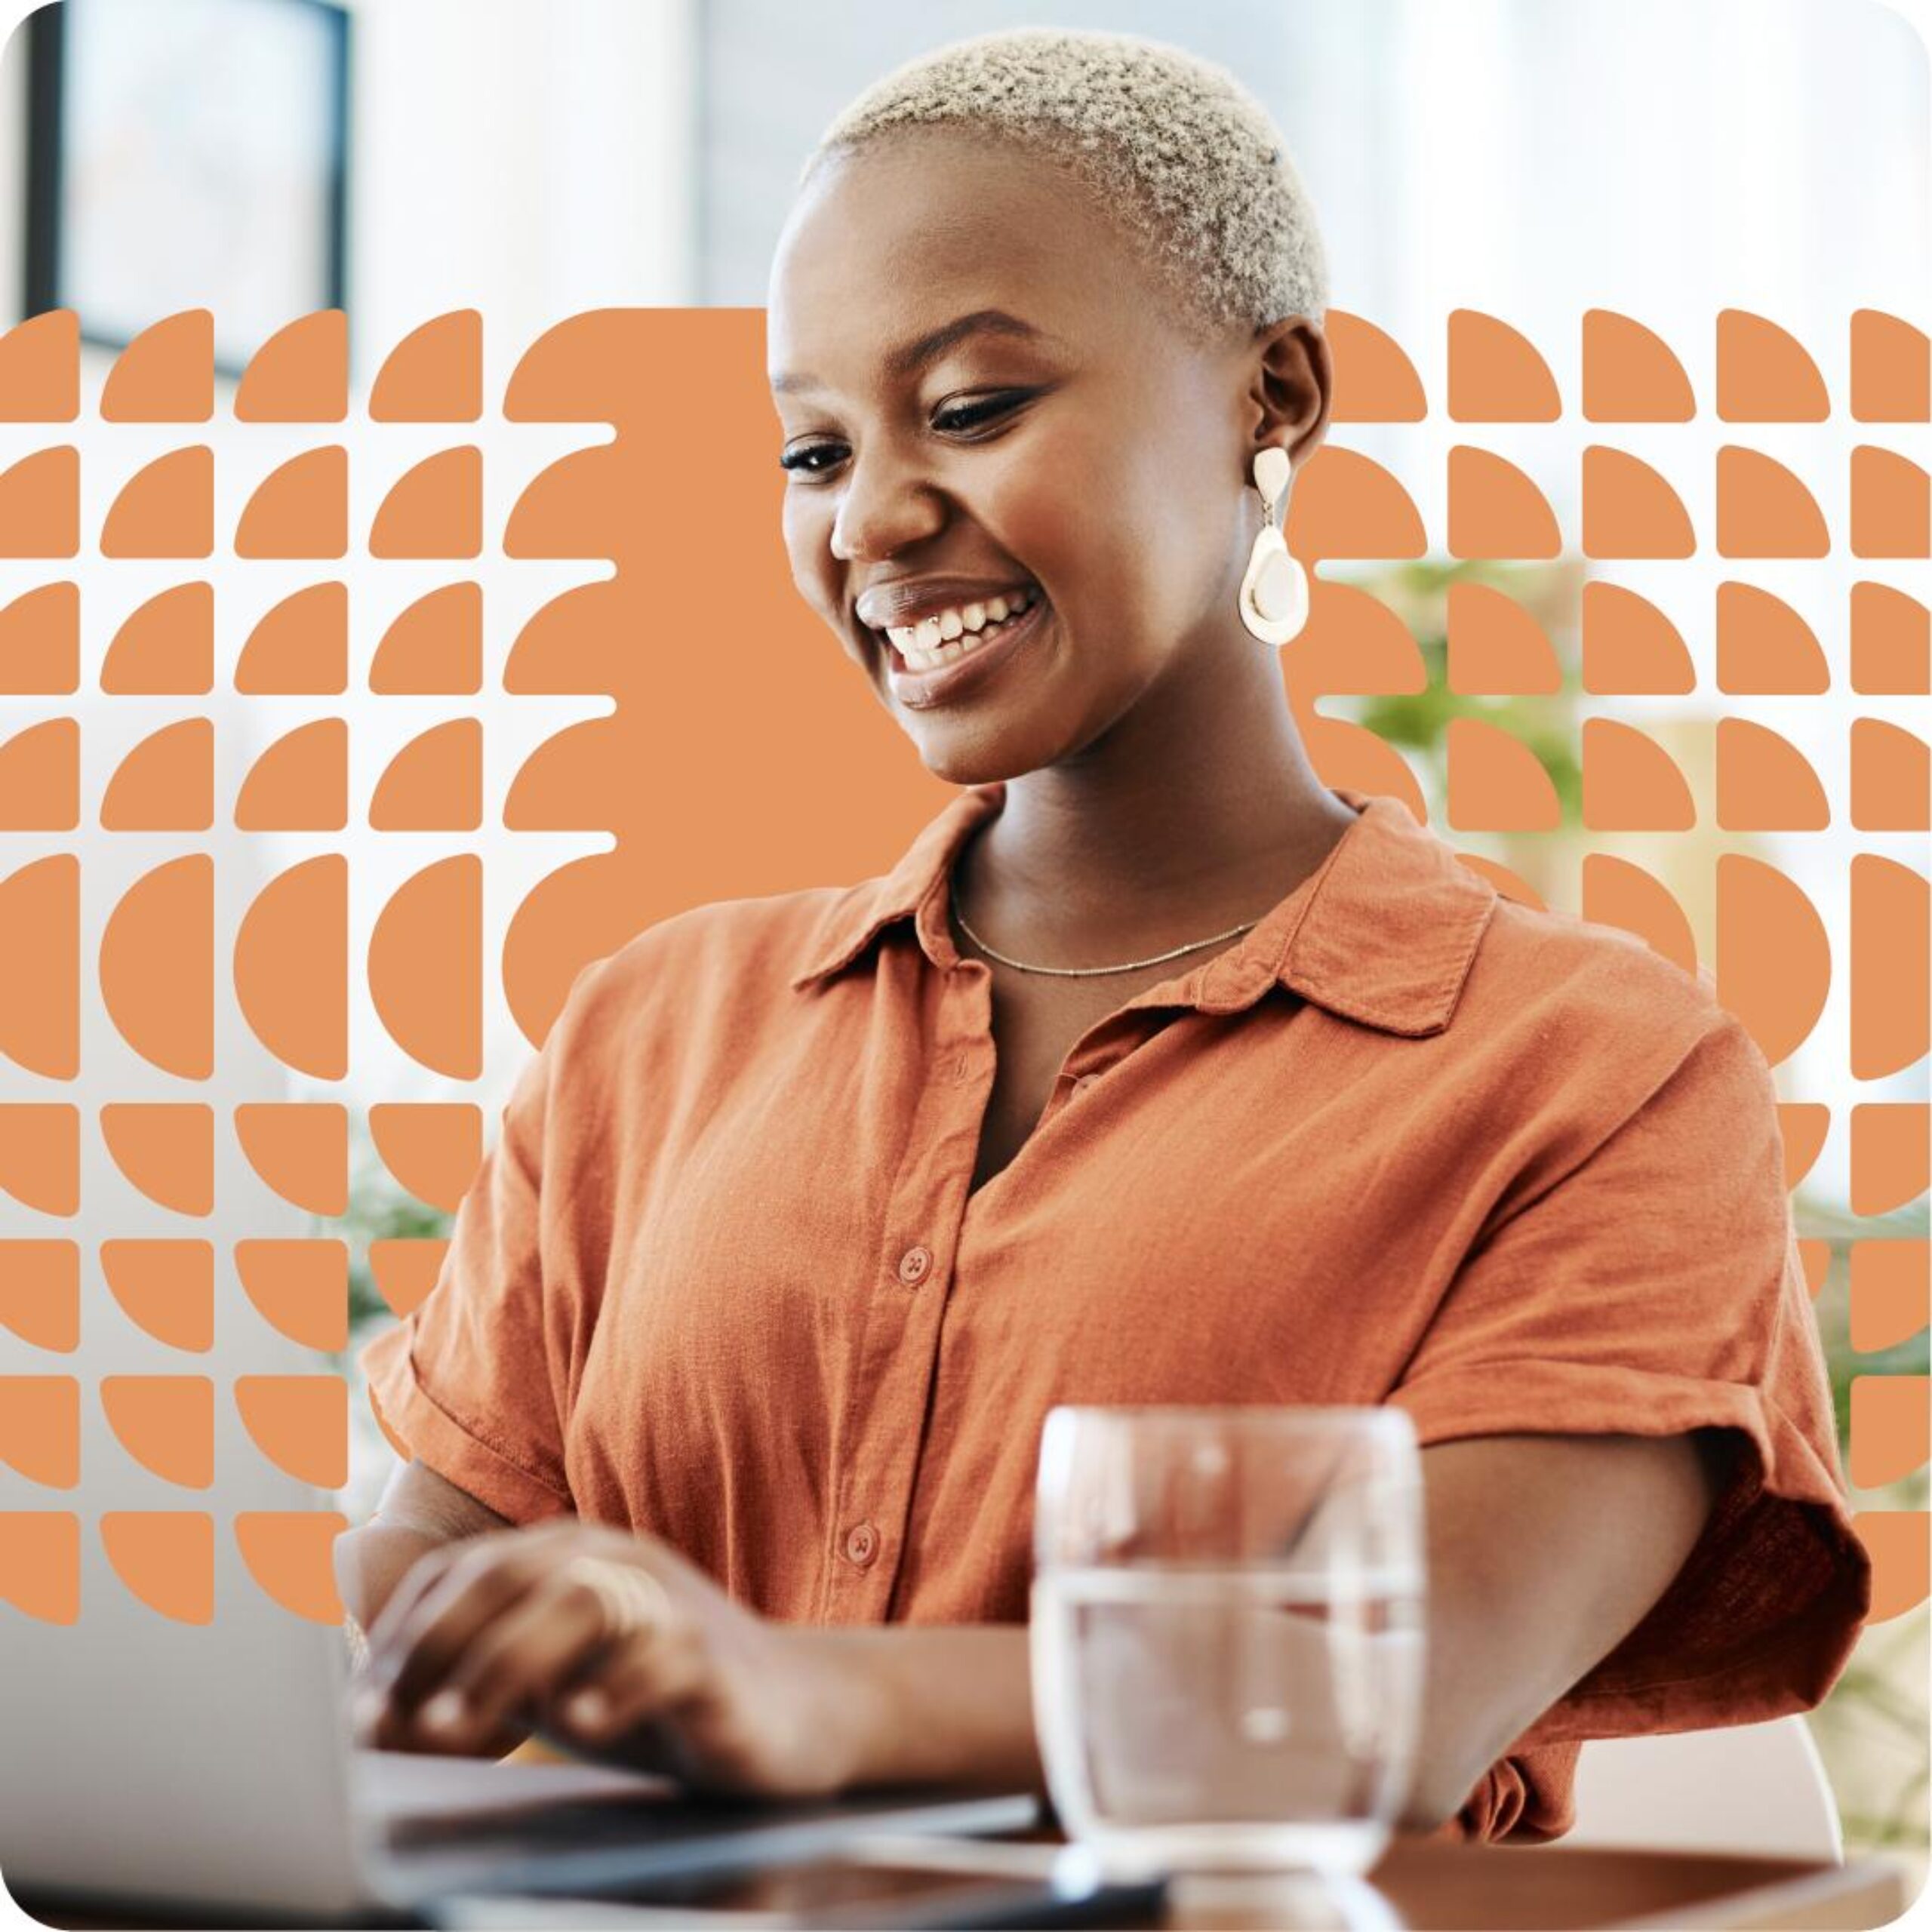 A person with short hair smiles while typing on a laptop, with a glass of water in the foreground and an orange geometric pattern in the background, possibly working on some 3D event diagramming.